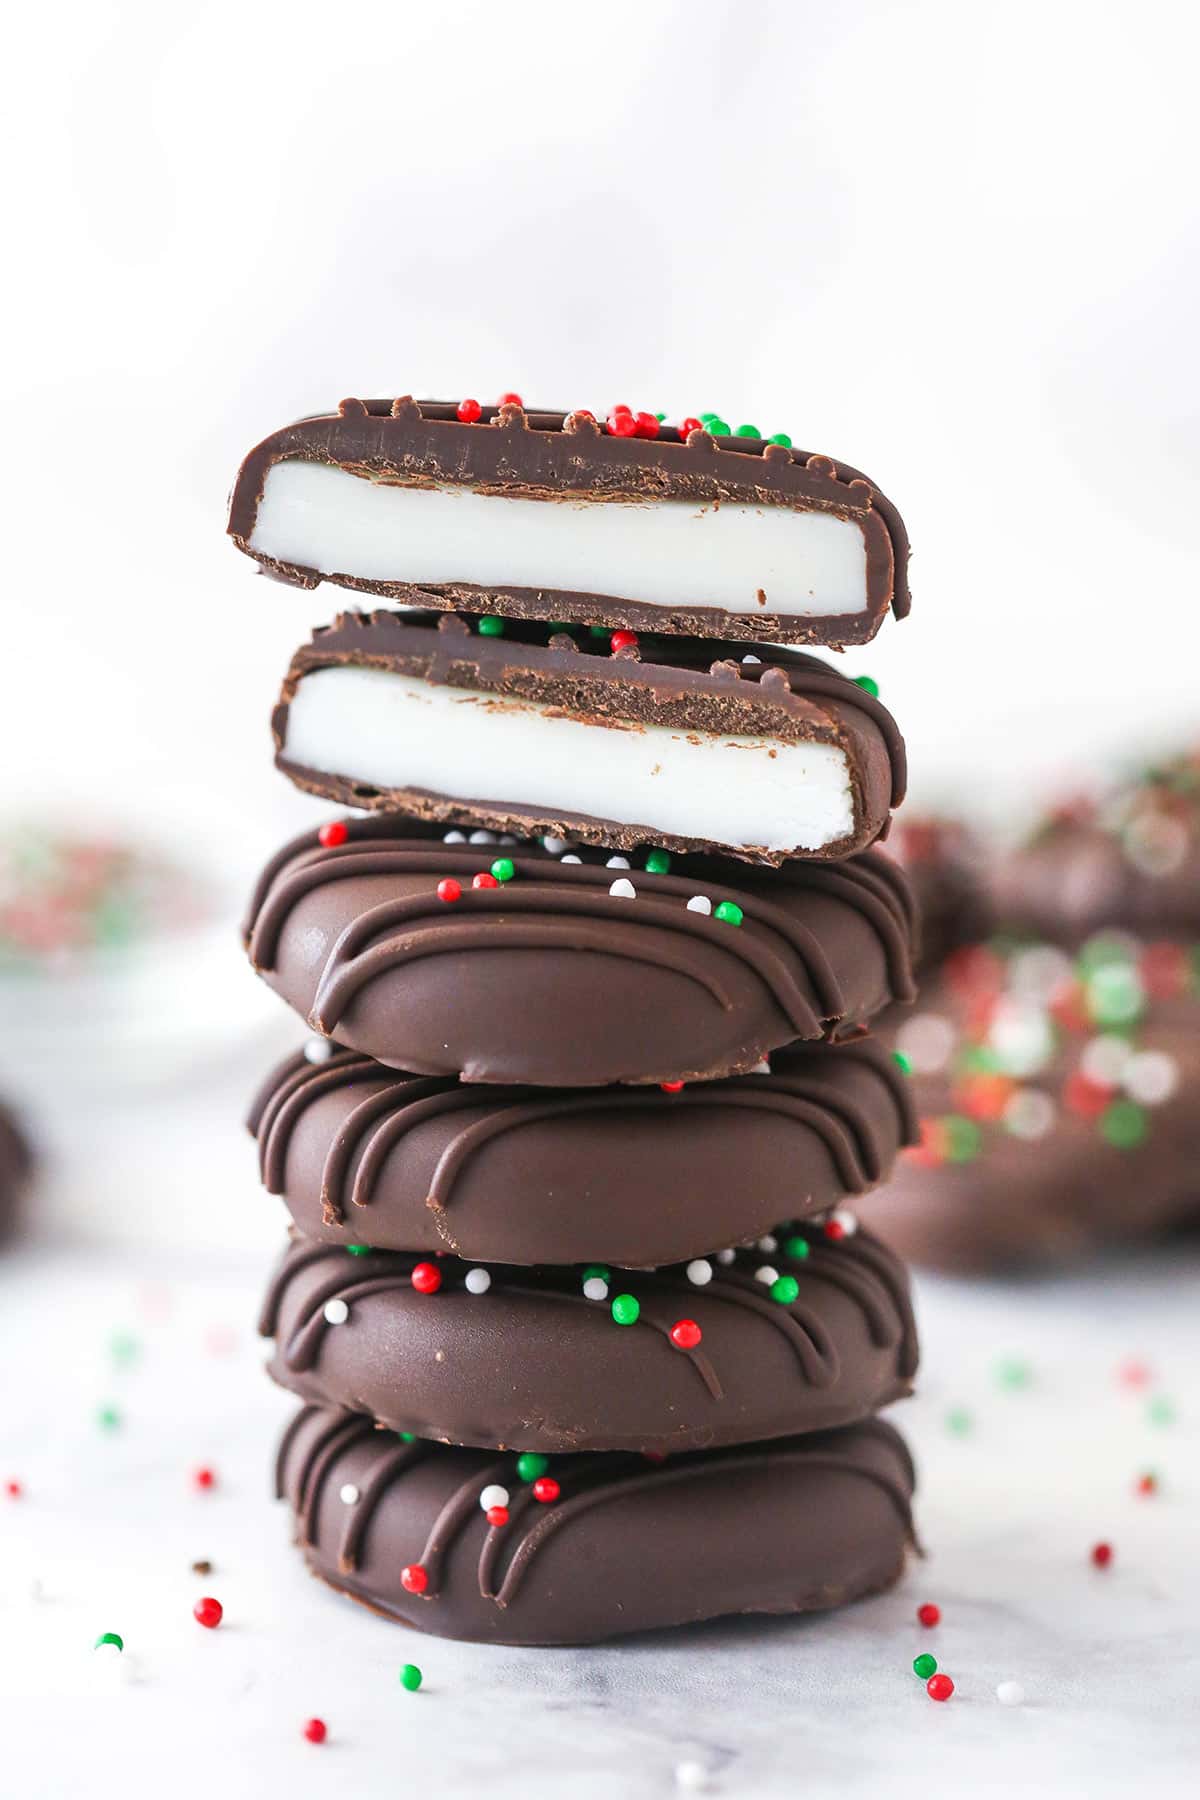 A stack of peppermint patties. The top patty is cut in half.